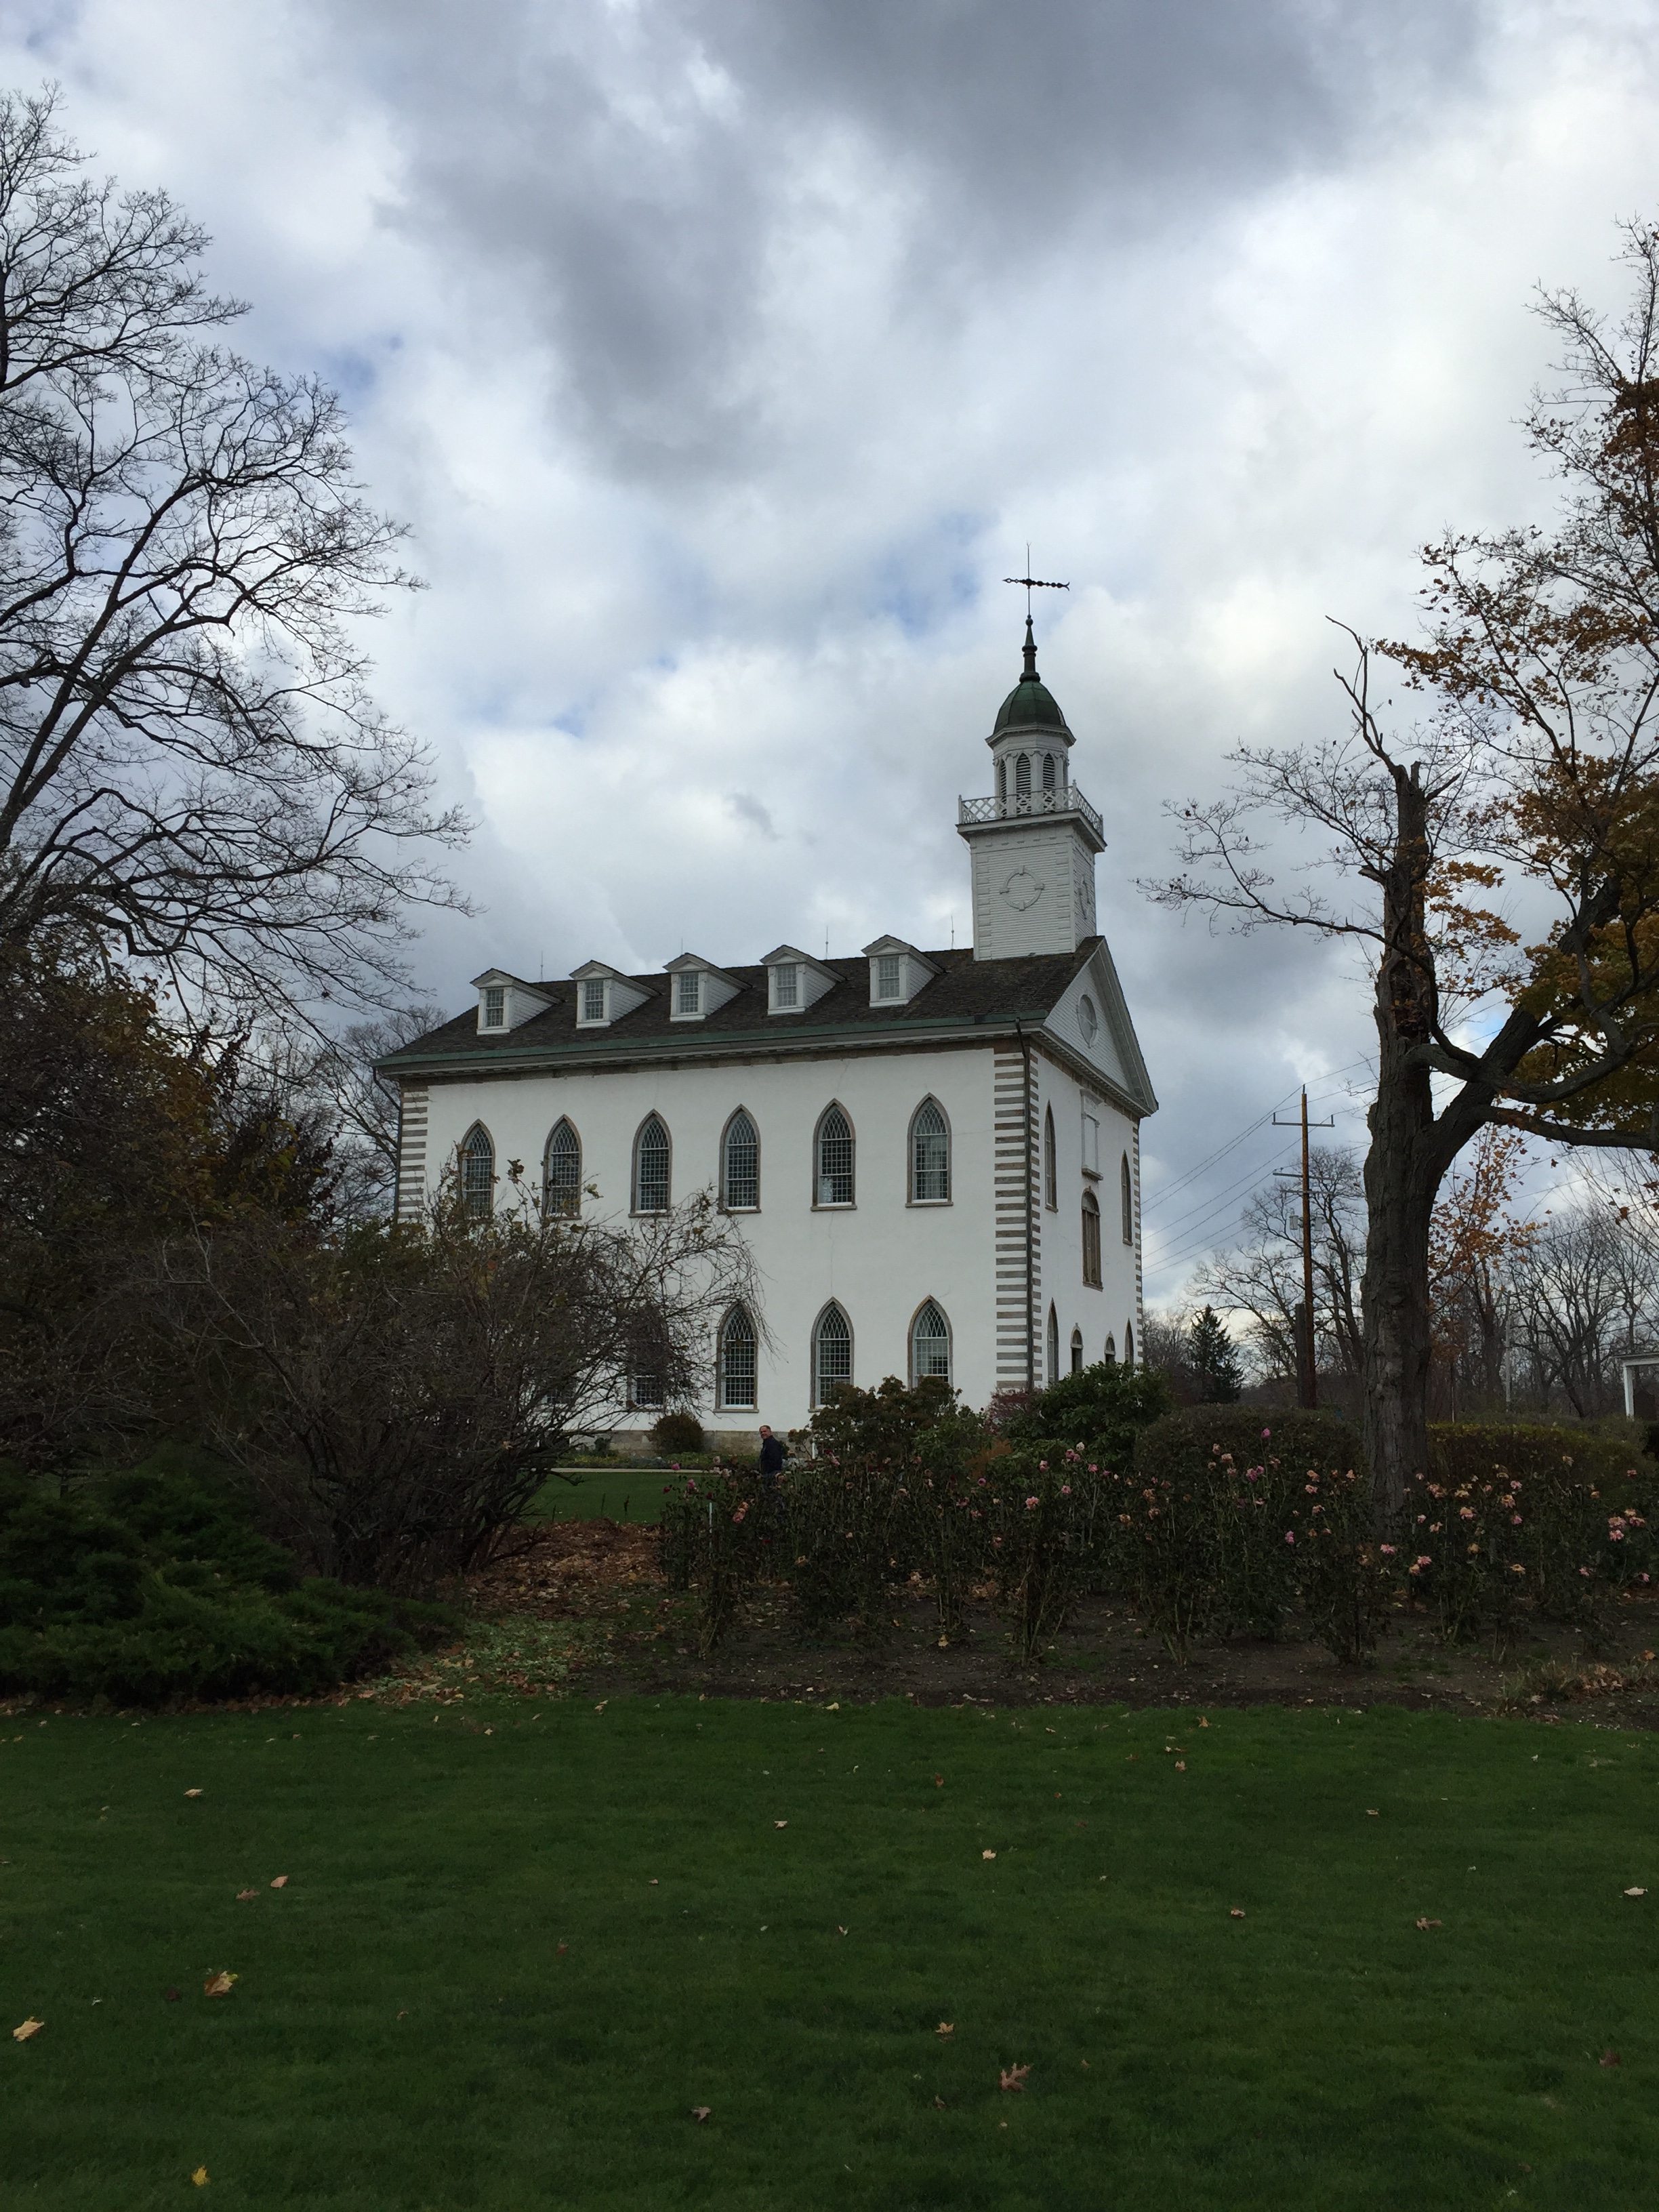 Kirtland Temple. First temple completed by Church of Jesus Christ of Latter-day Saints.  Kirtland Ohio.